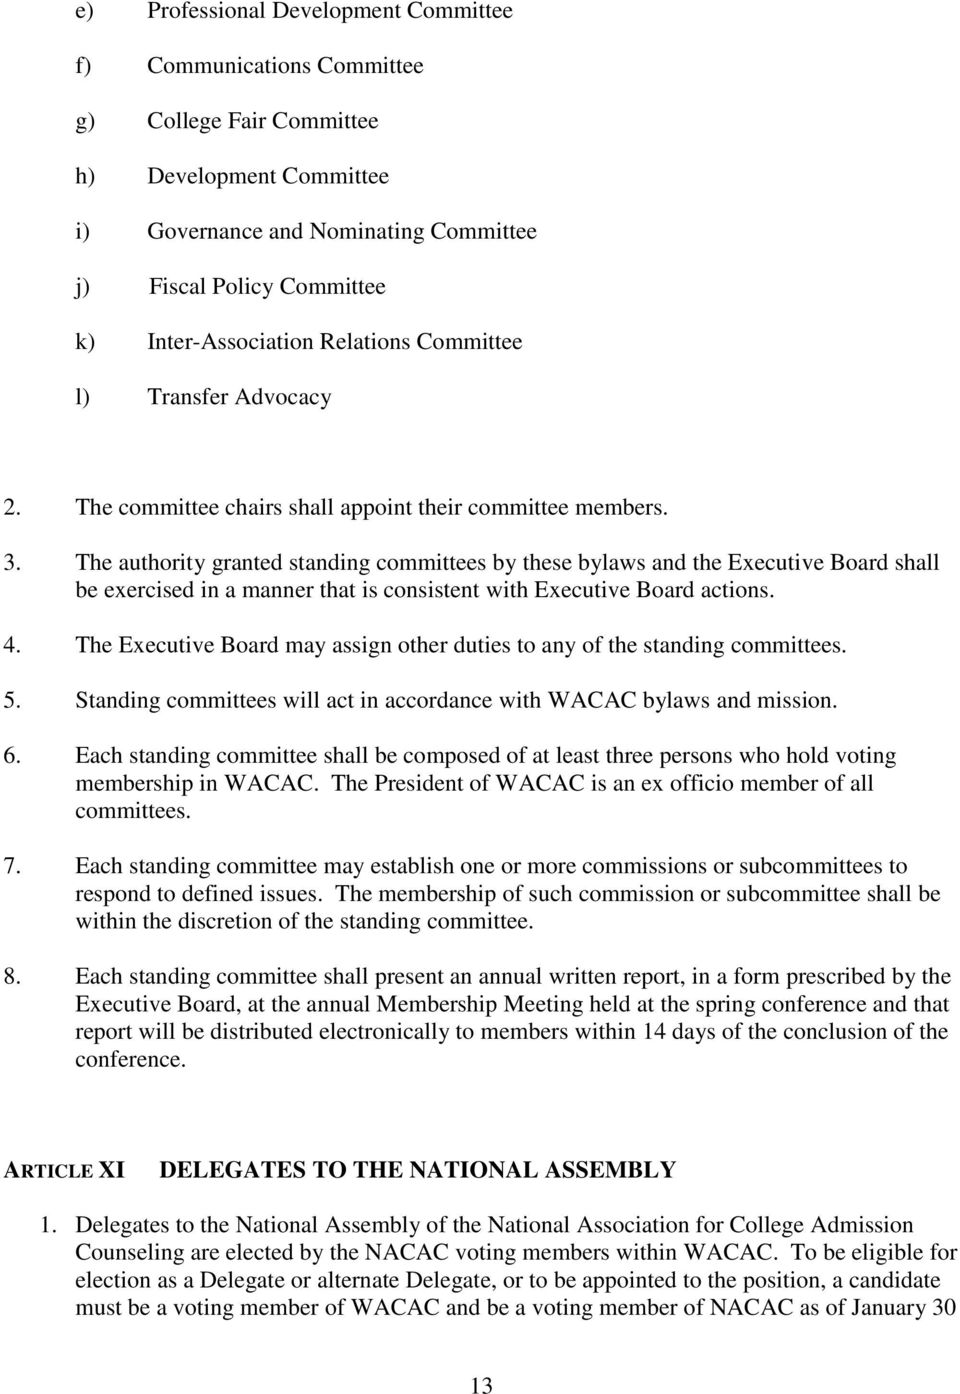 The authority granted standing committees by these bylaws and the Executive Board shall be exercised in a manner that is consistent with Executive Board actions. 4.